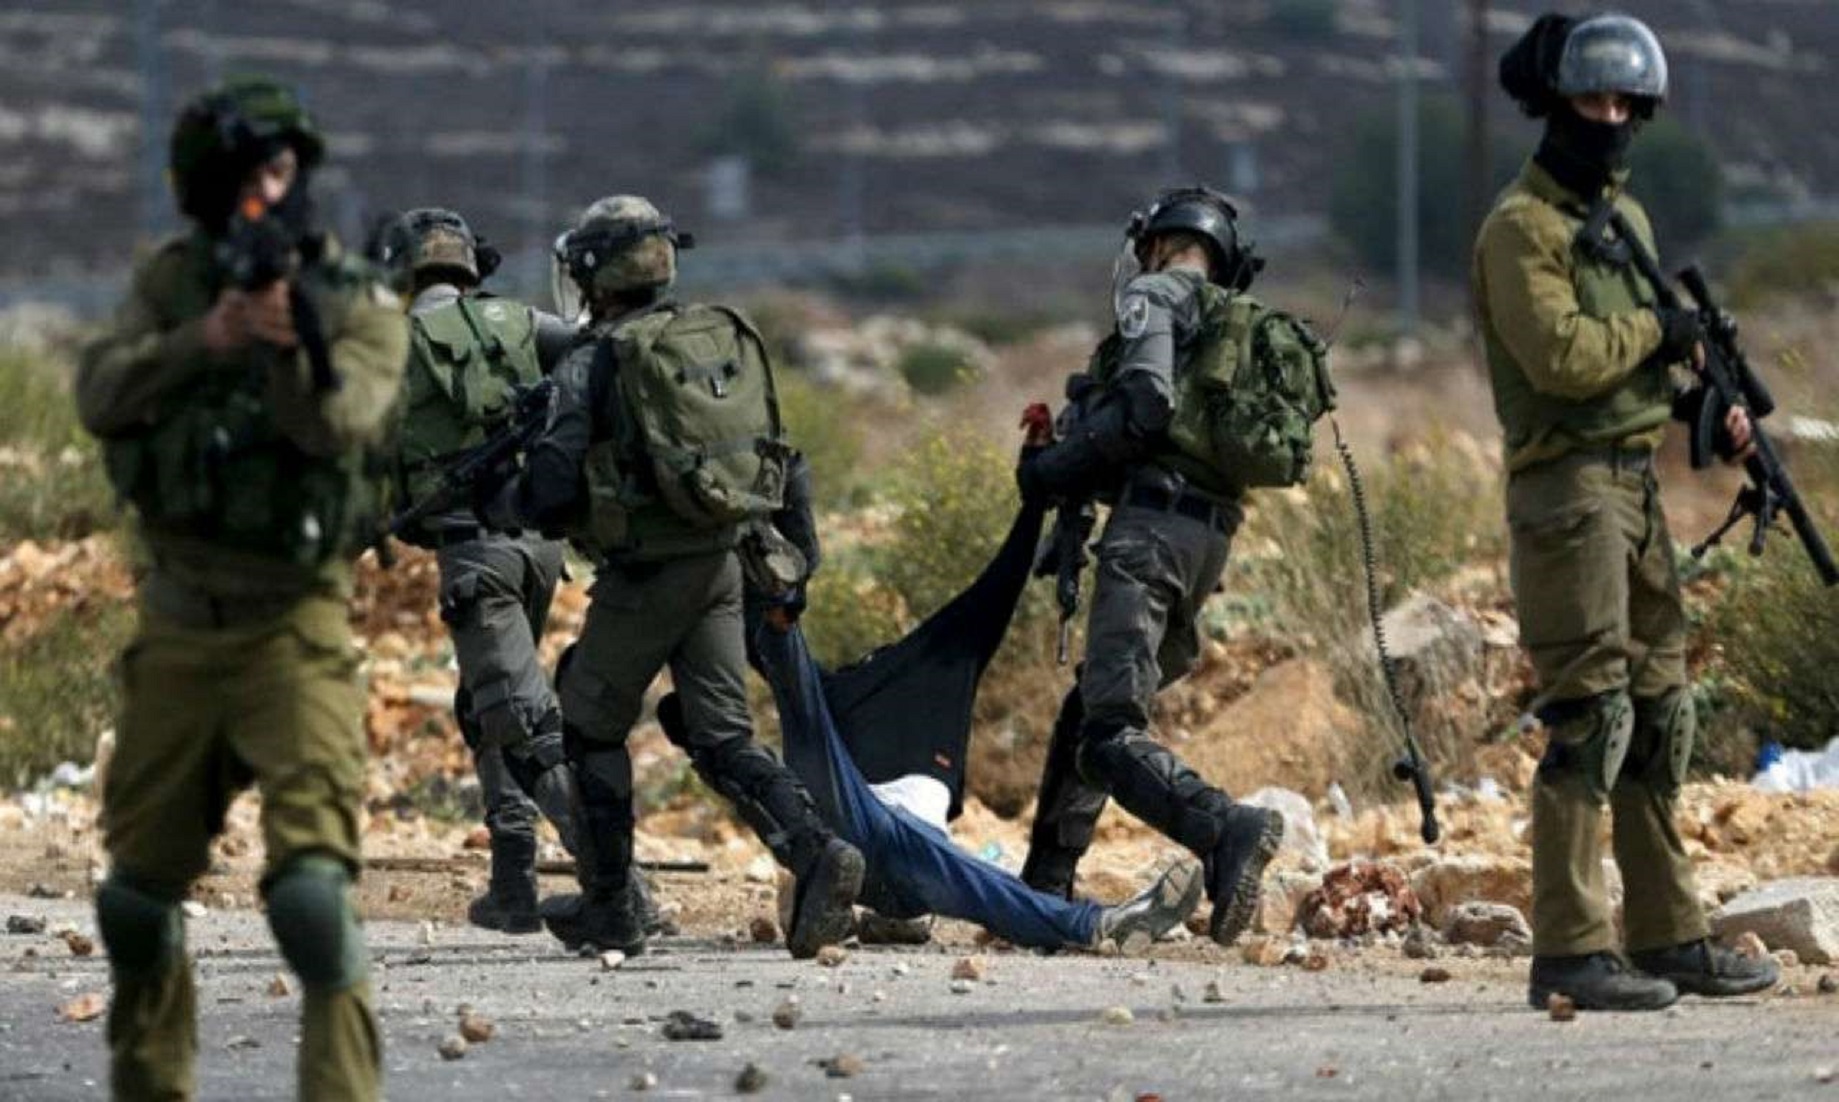 Another Palestinian Killed By Israeli Soldiers In West Bank: Health Ministry